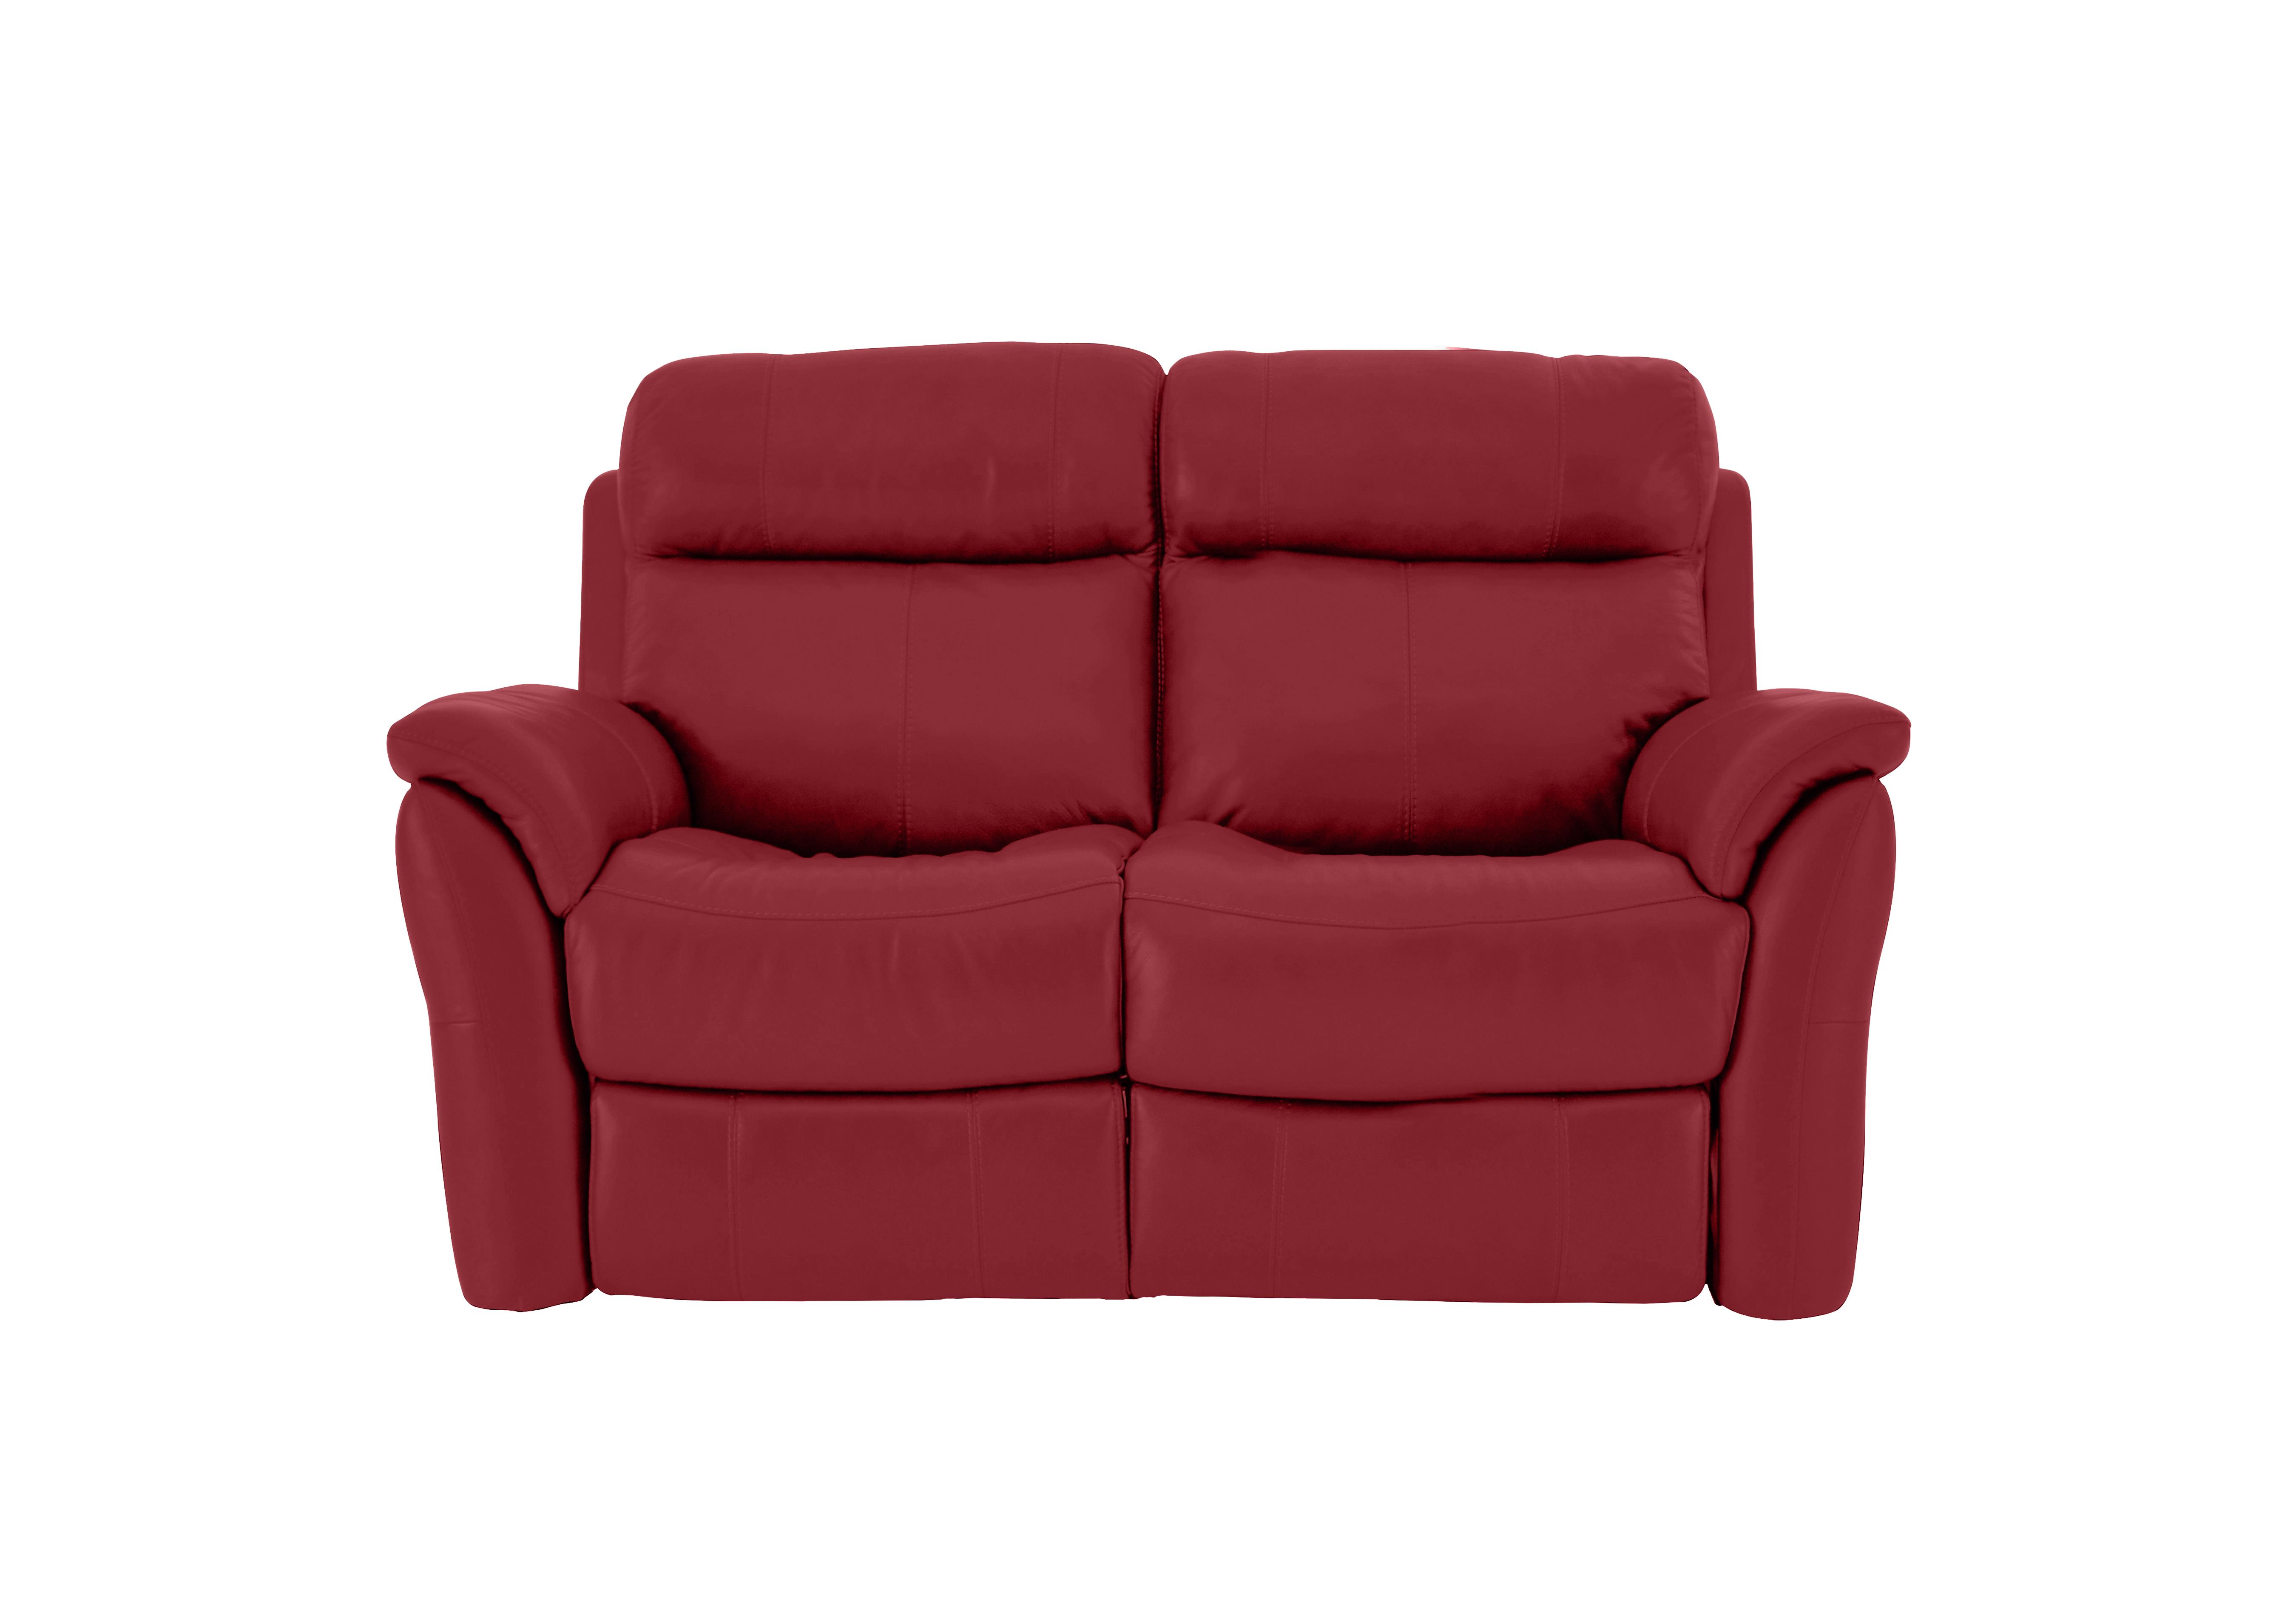 Relax Station Revive 2 Seater Leather Sofa in Bv-0008 Pure Red on Furniture Village